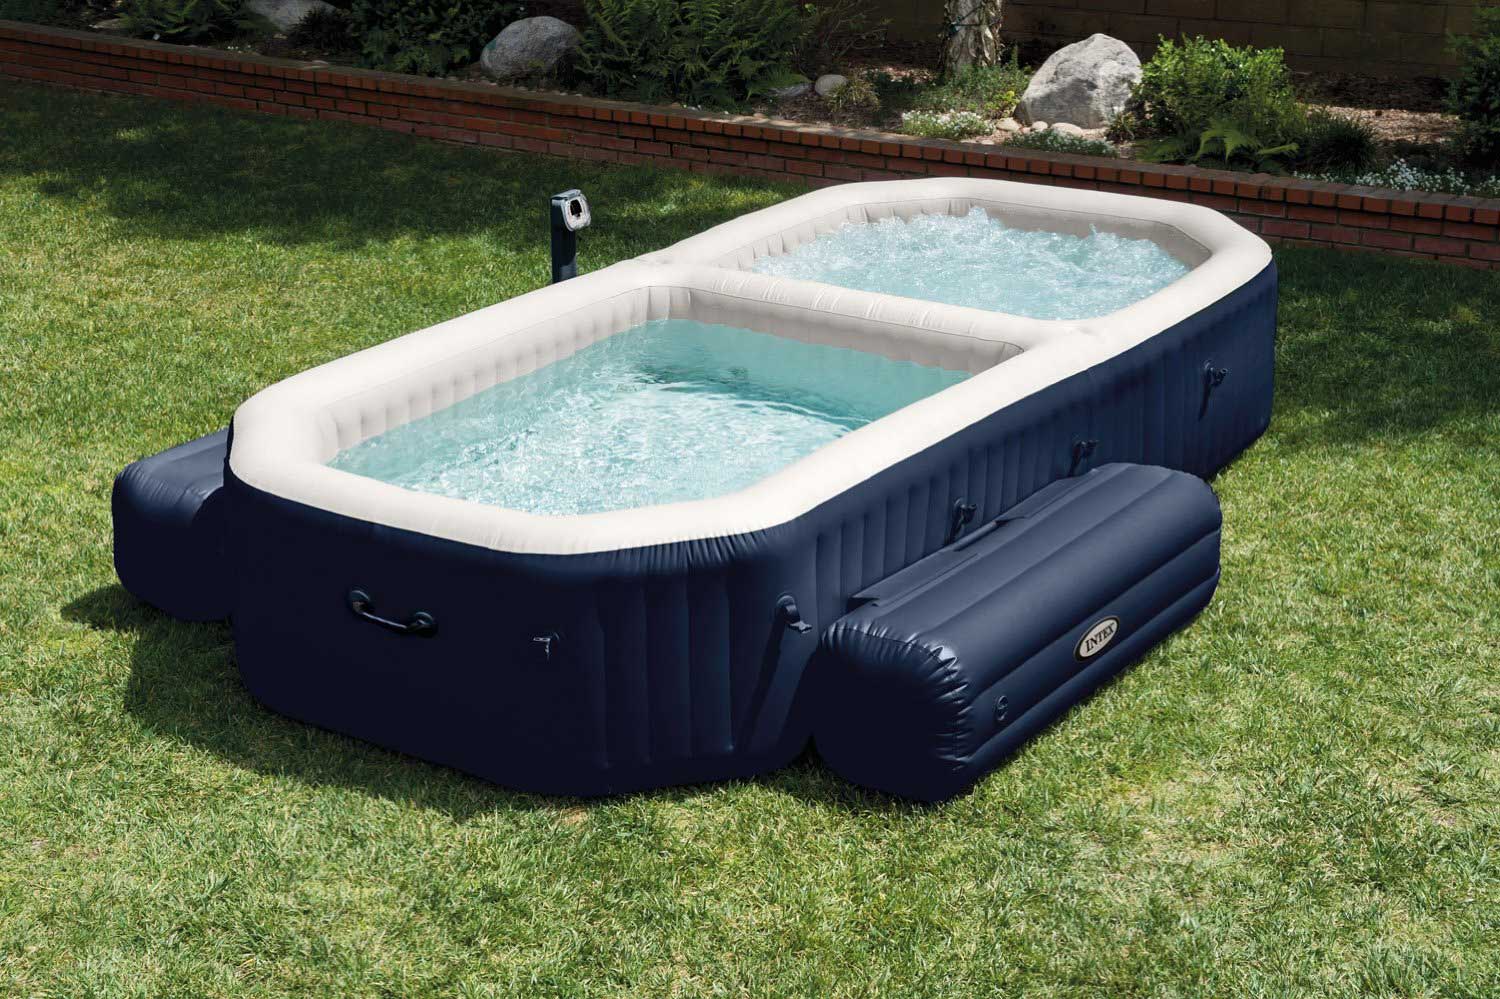 Intex Purespa Bubble Hot Tub And Pool Set Review - Best Inflatable Hot